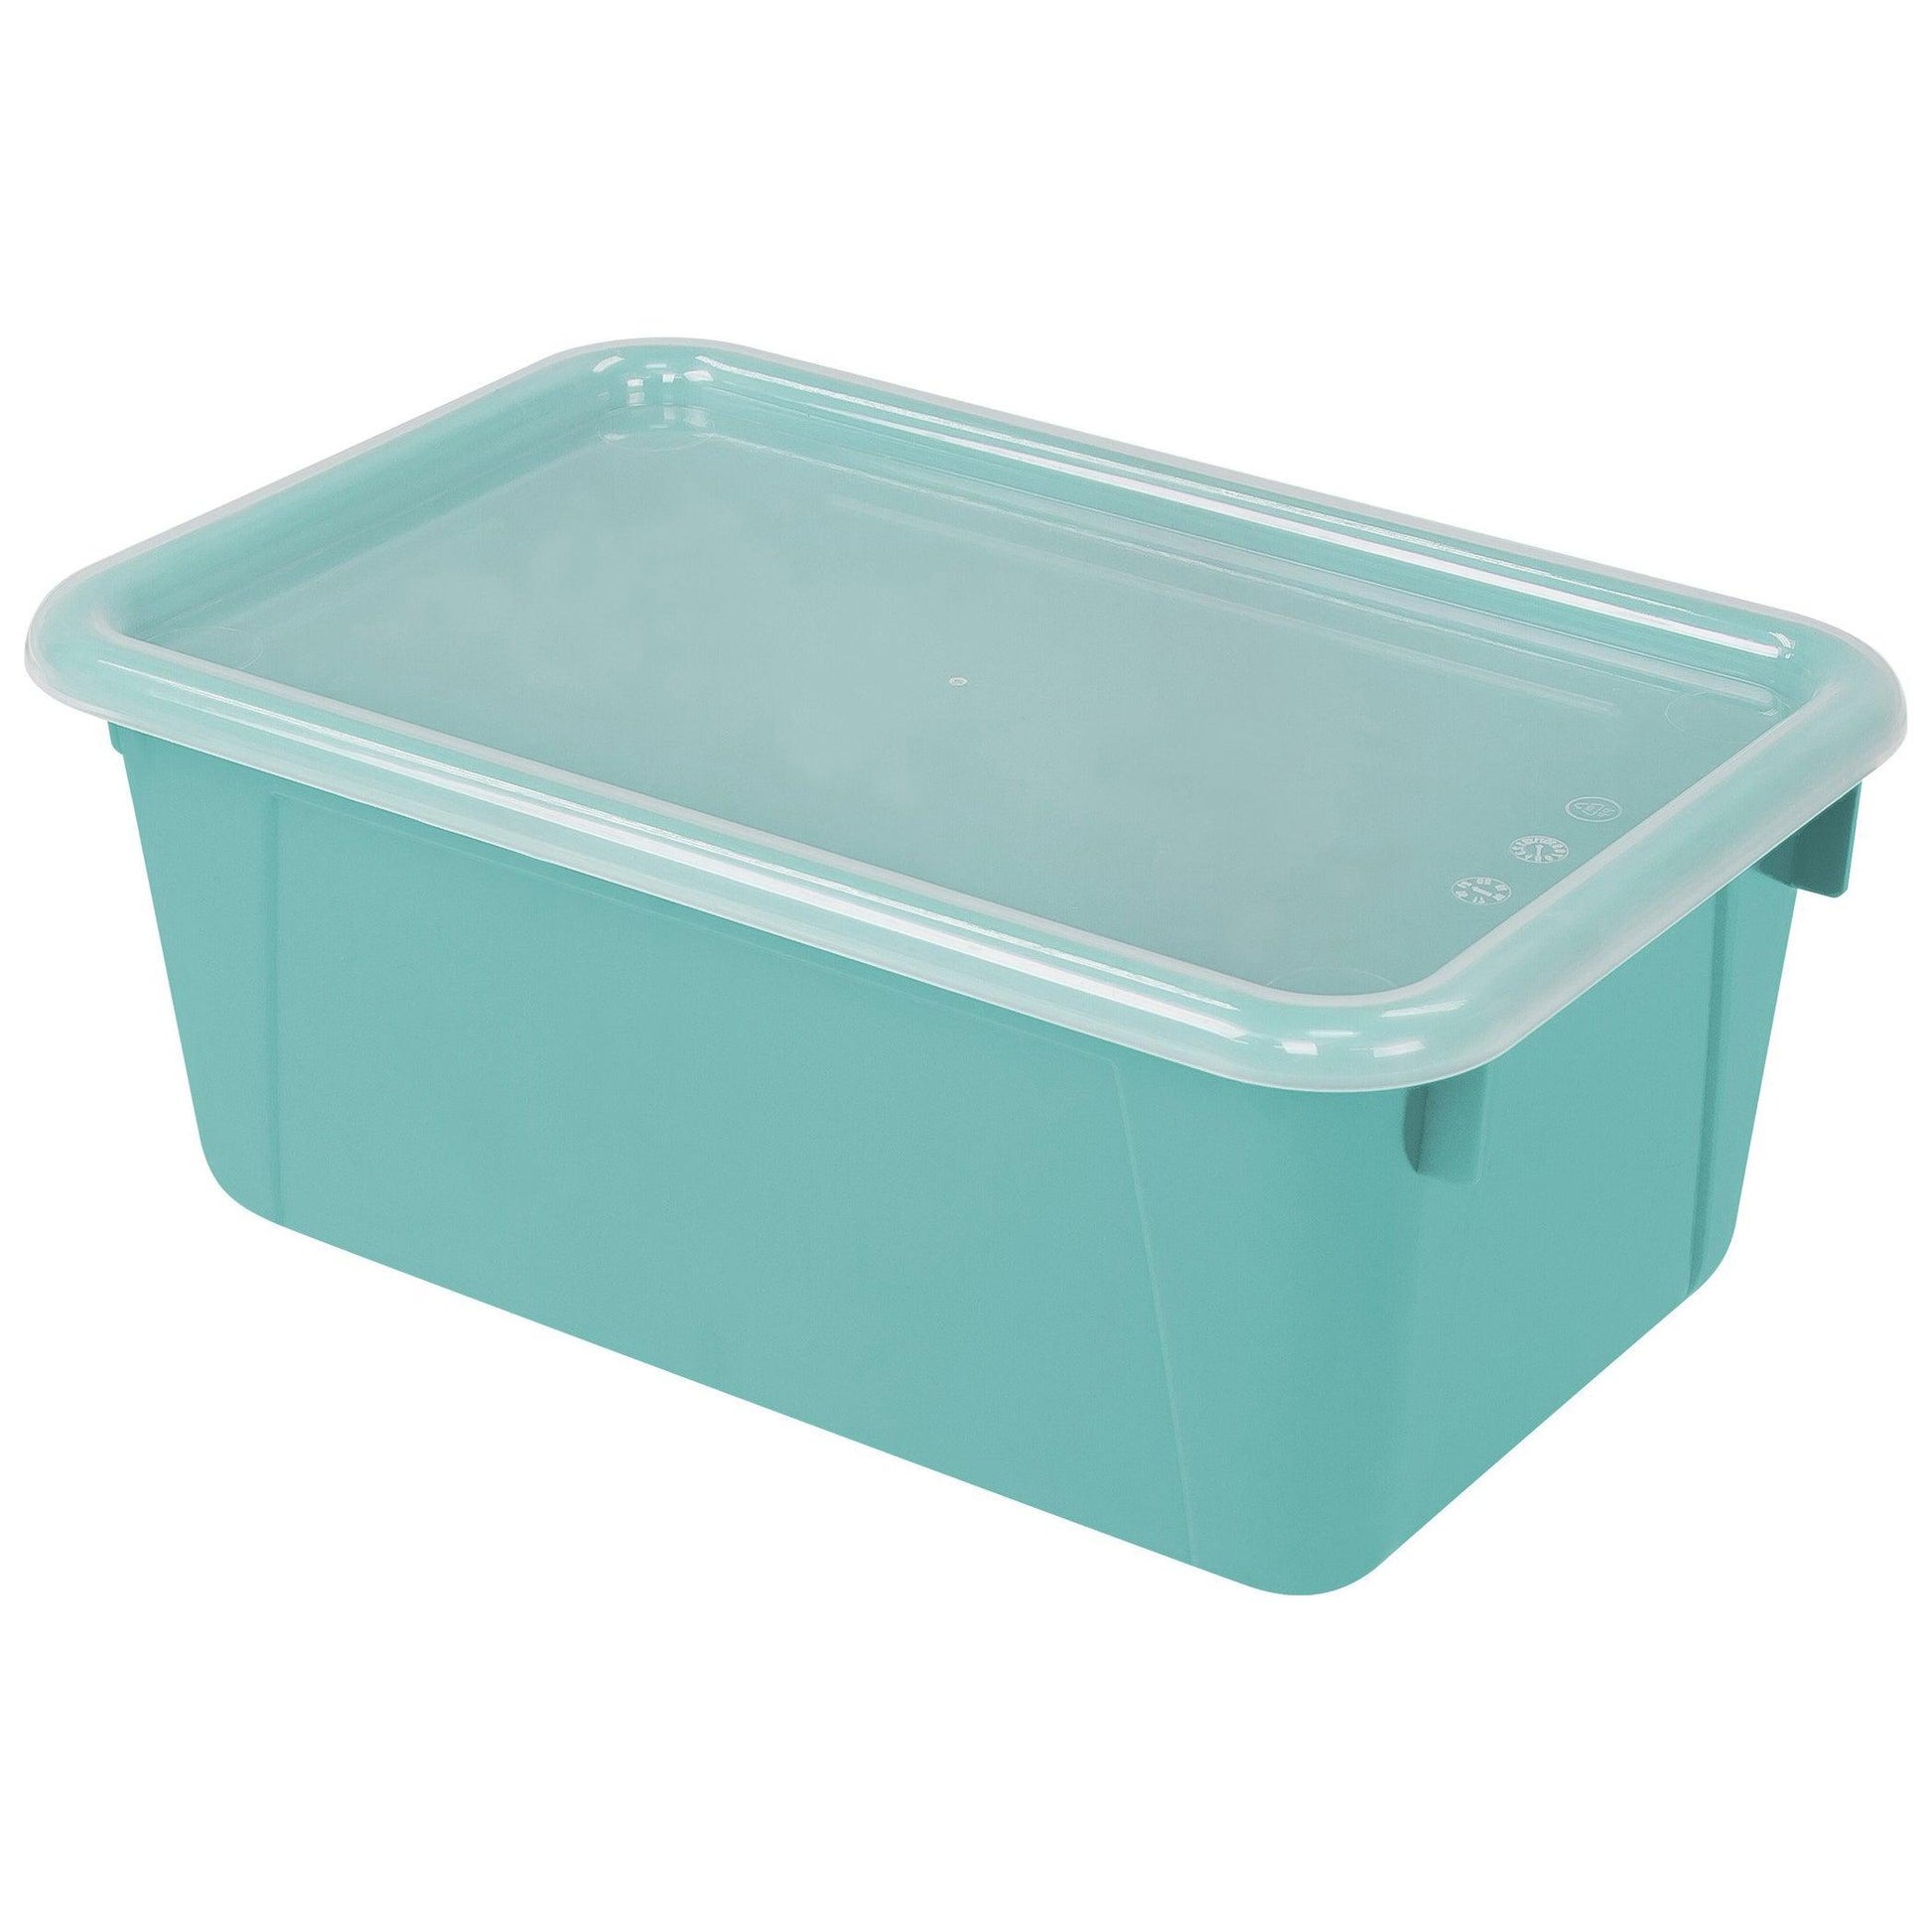 Small Cubby Bin, with Cover, Classroom Teal, Pack of 2 - Loomini